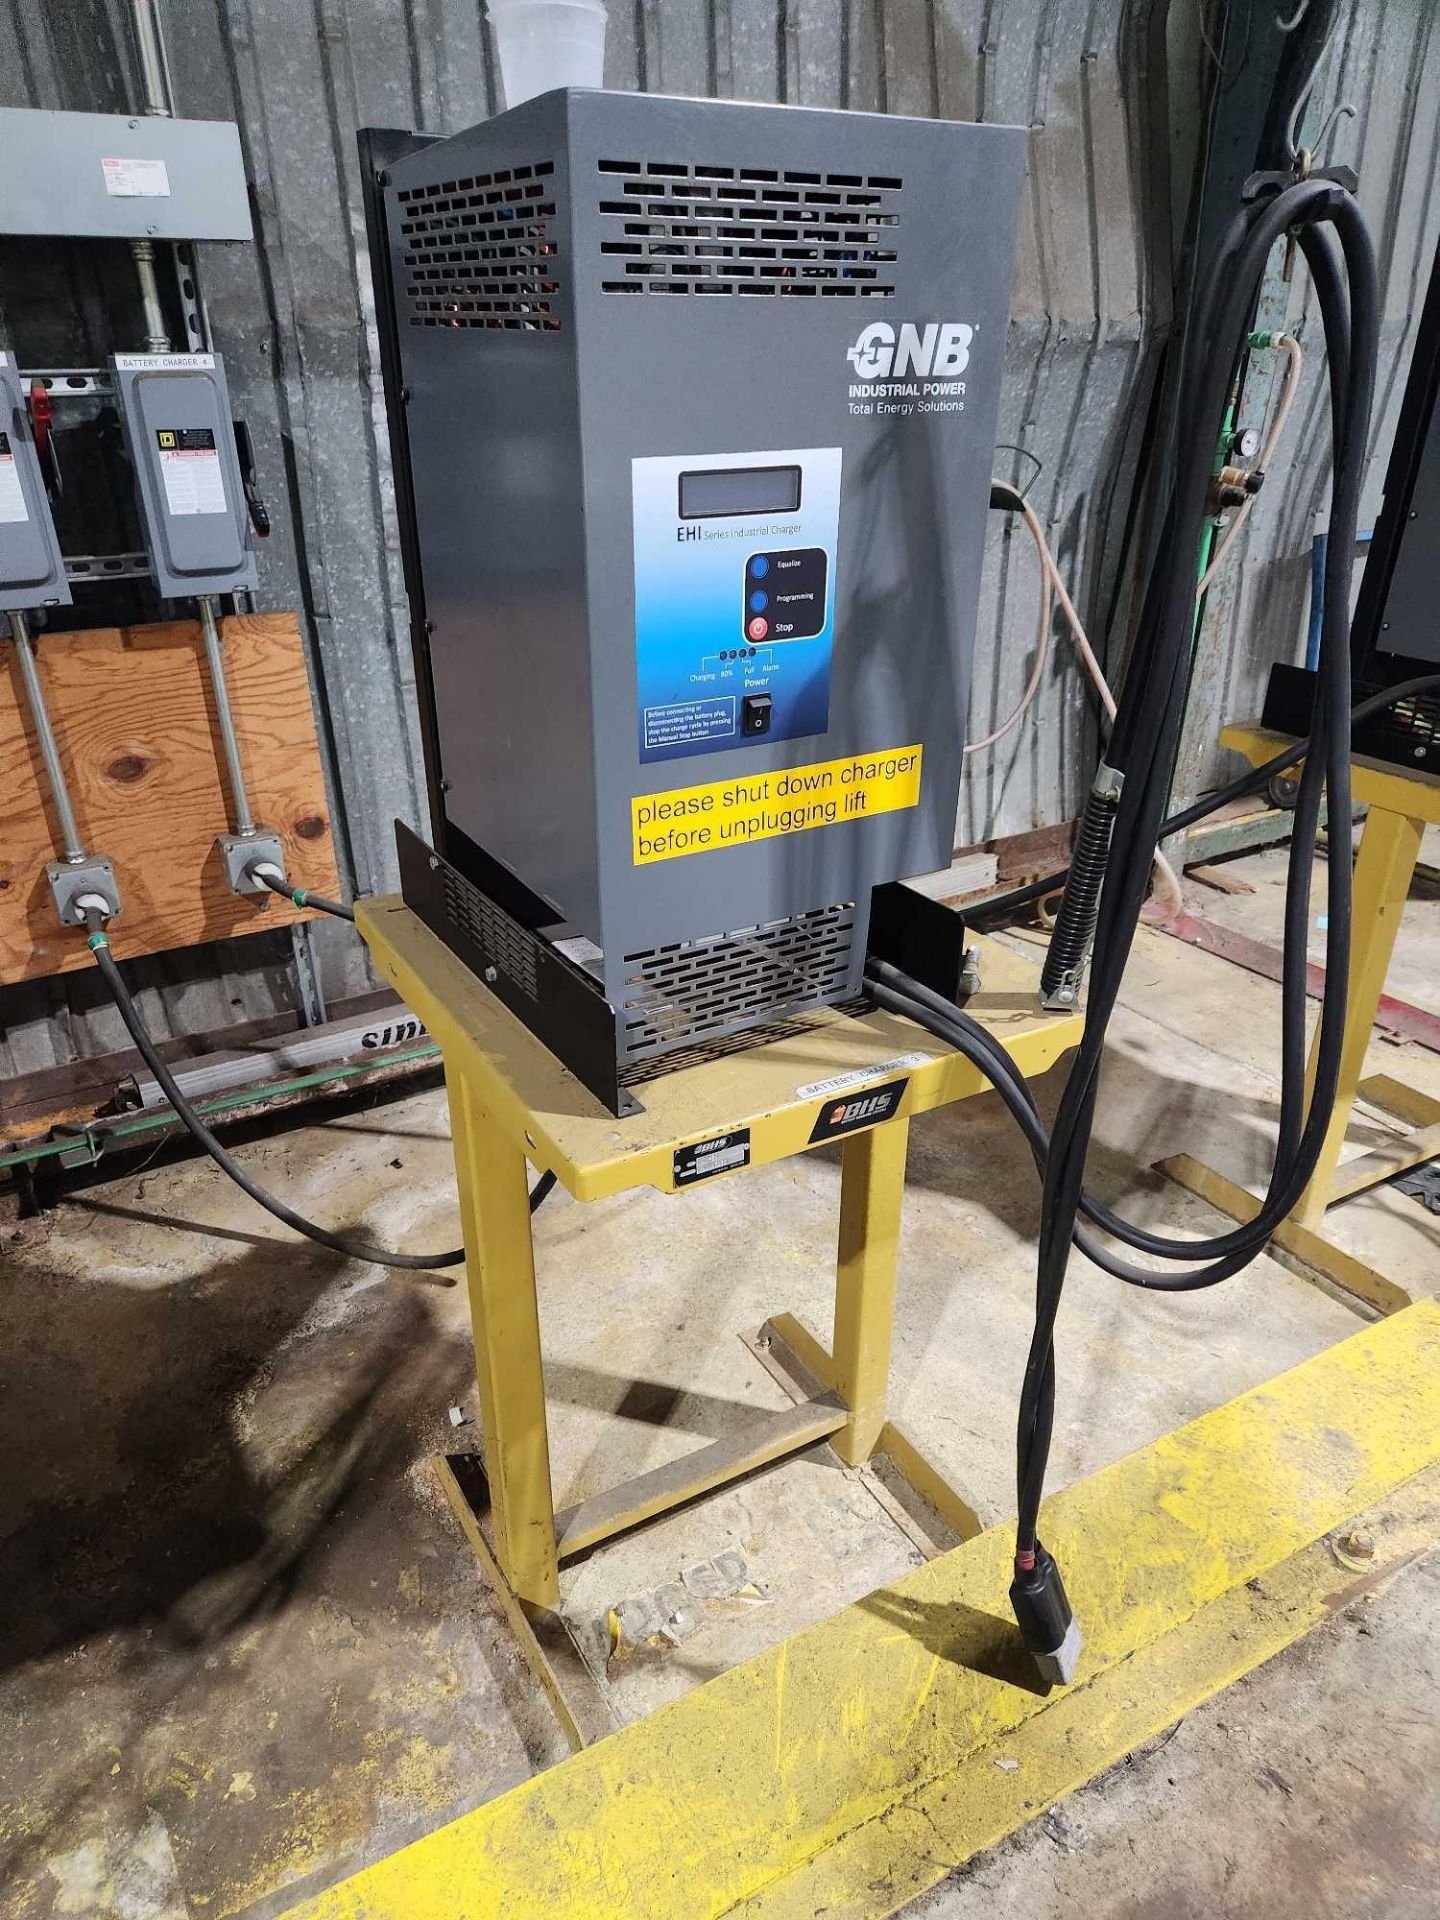 2017 GNB battery charger, mn EHIMV48H260, 3 phase with stand (CHARGER 3) (WAREHOUSE)